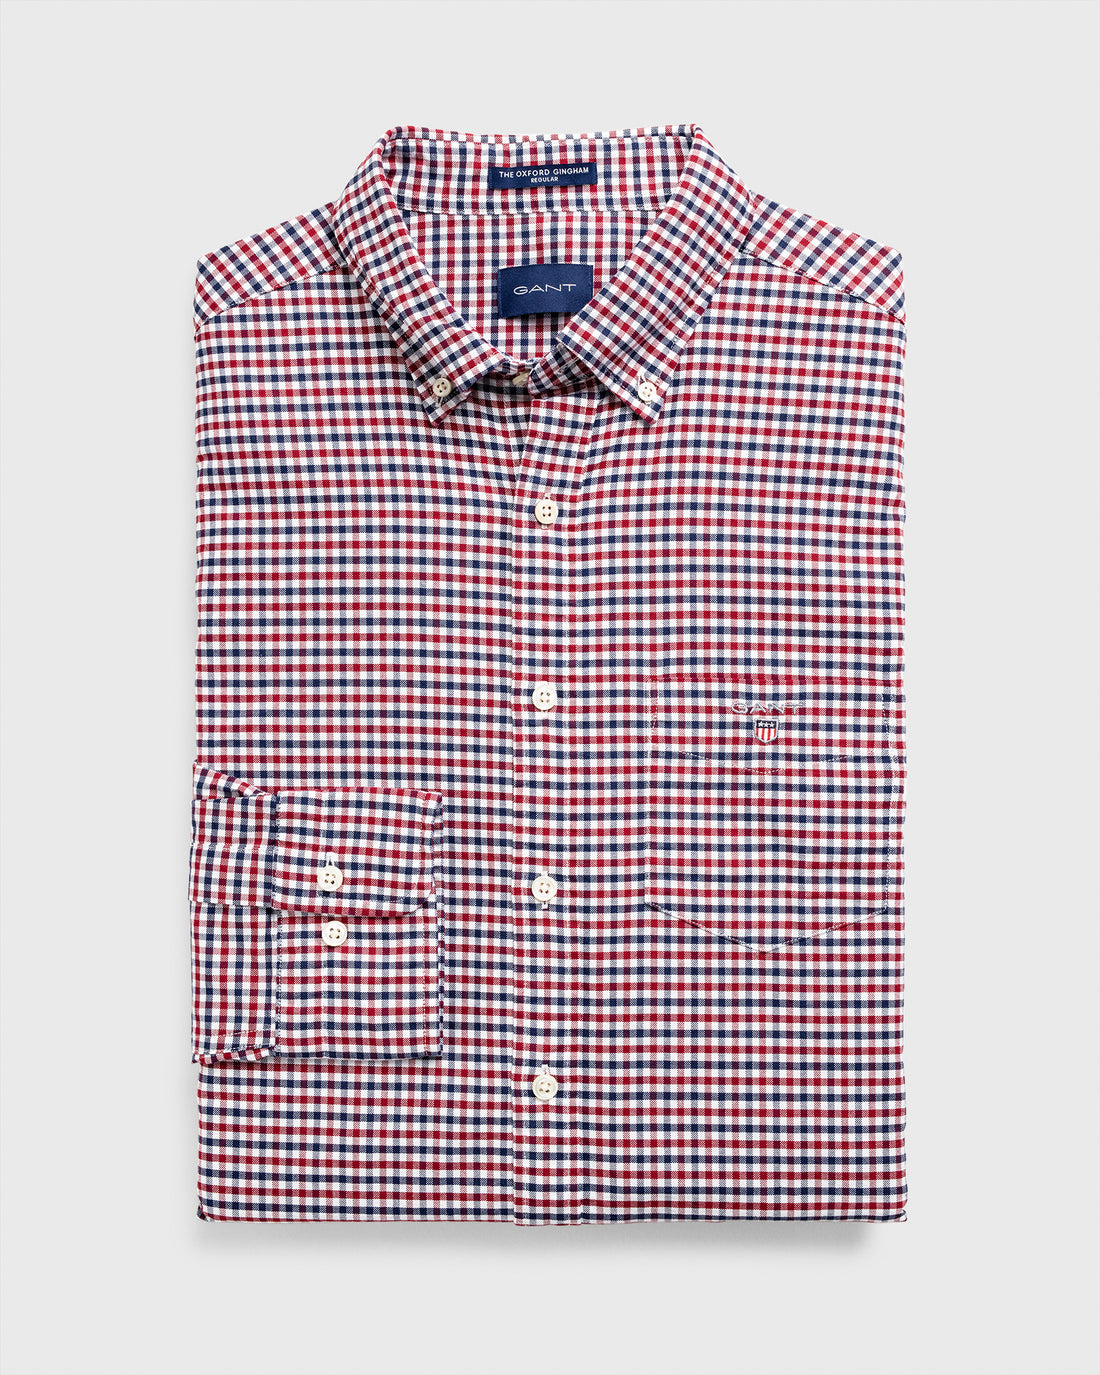 The Oxford 3 Colour Gingham Red